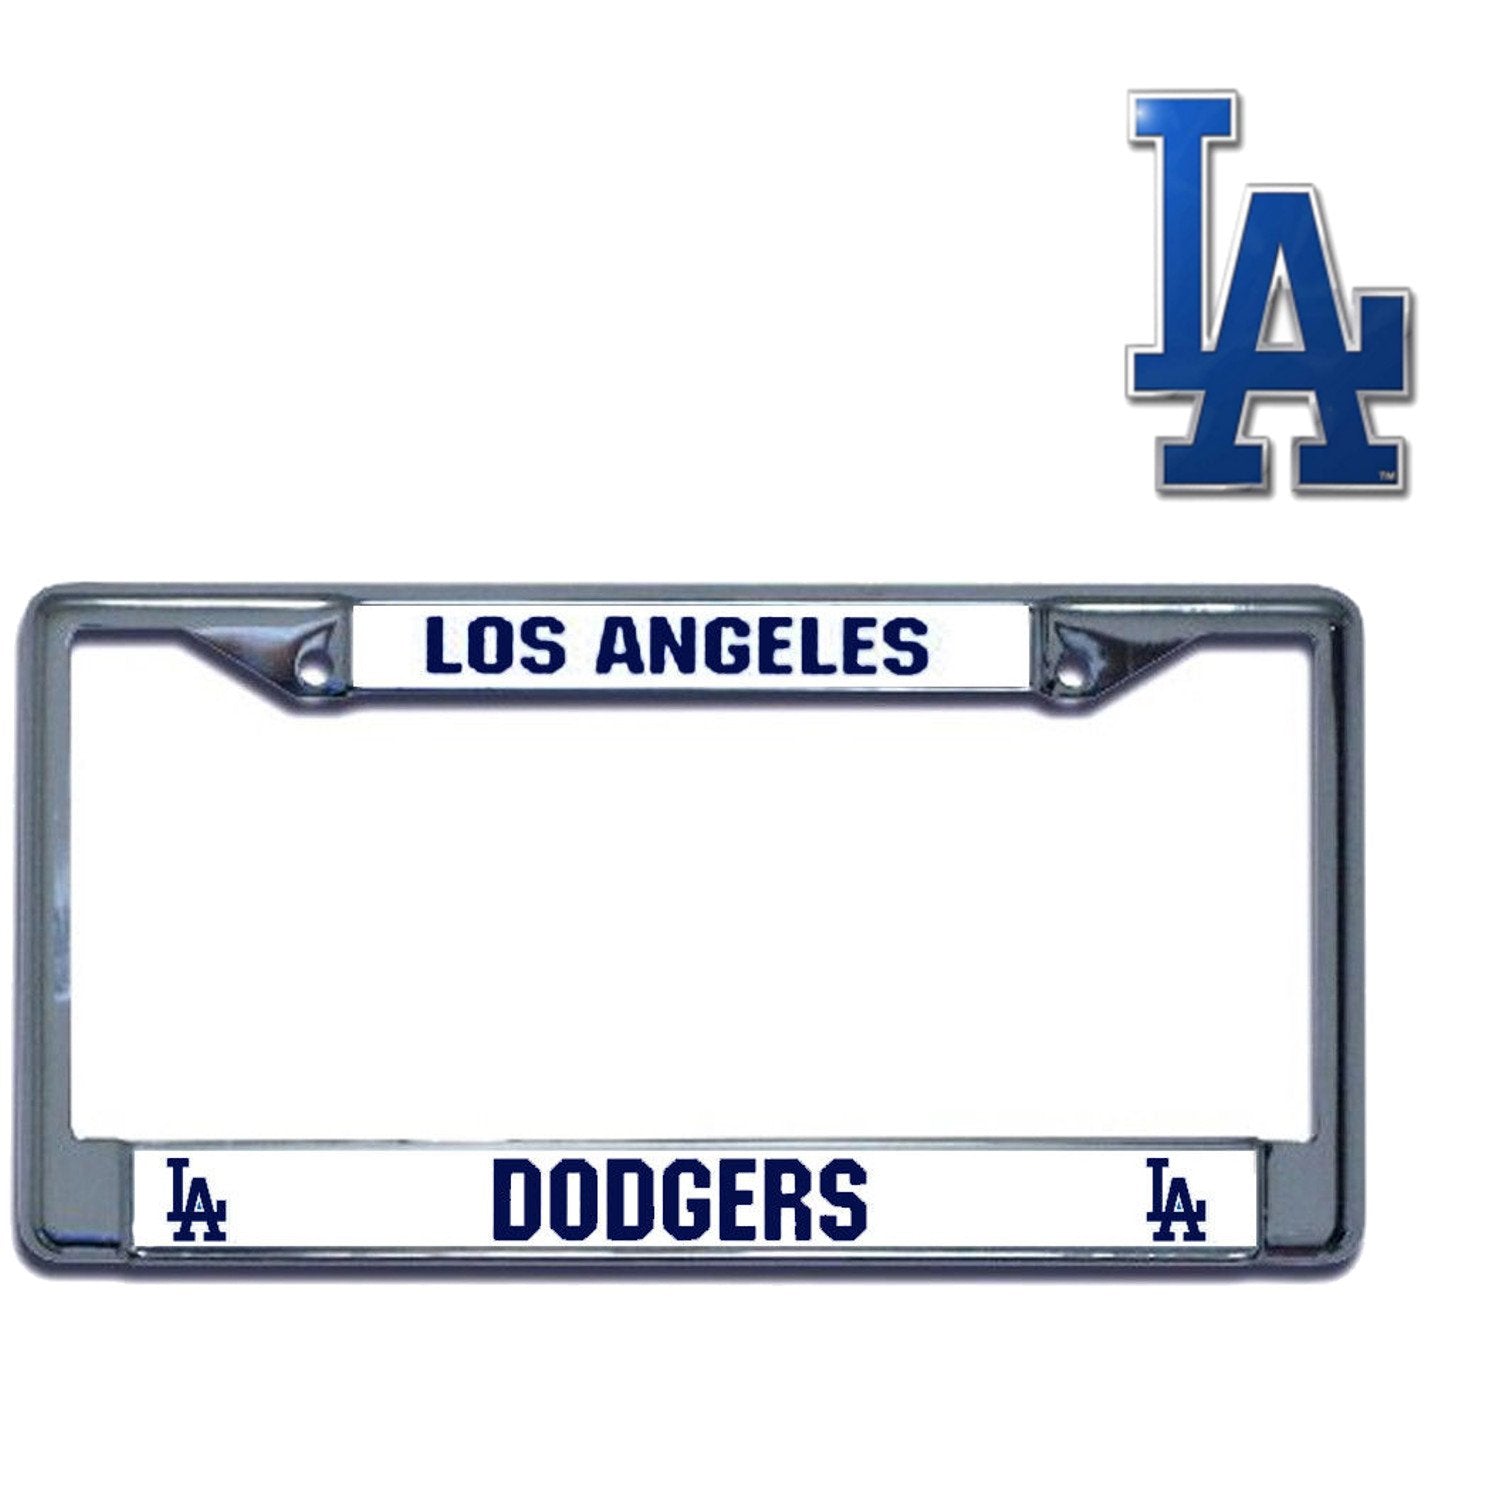 Rico Industries Official Major League Baseball Fan Shop Licensed MLB Shop Authentic Chrome Colored License Plate Frame and Matching Chrome Emblem